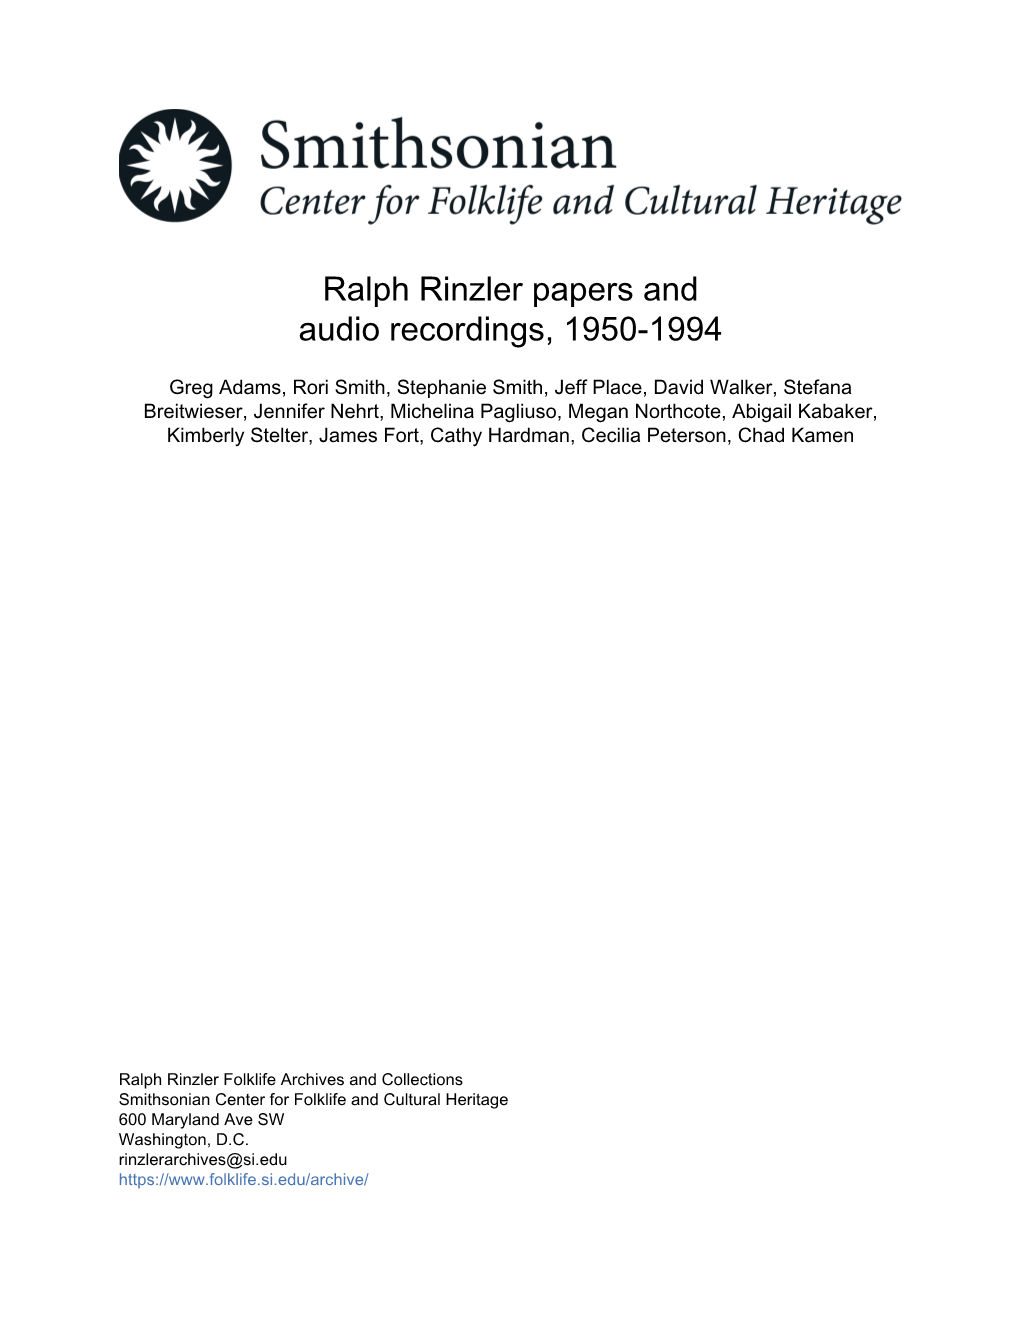 Ralph Rinzler Papers and Audio Recordings, 1950-1994